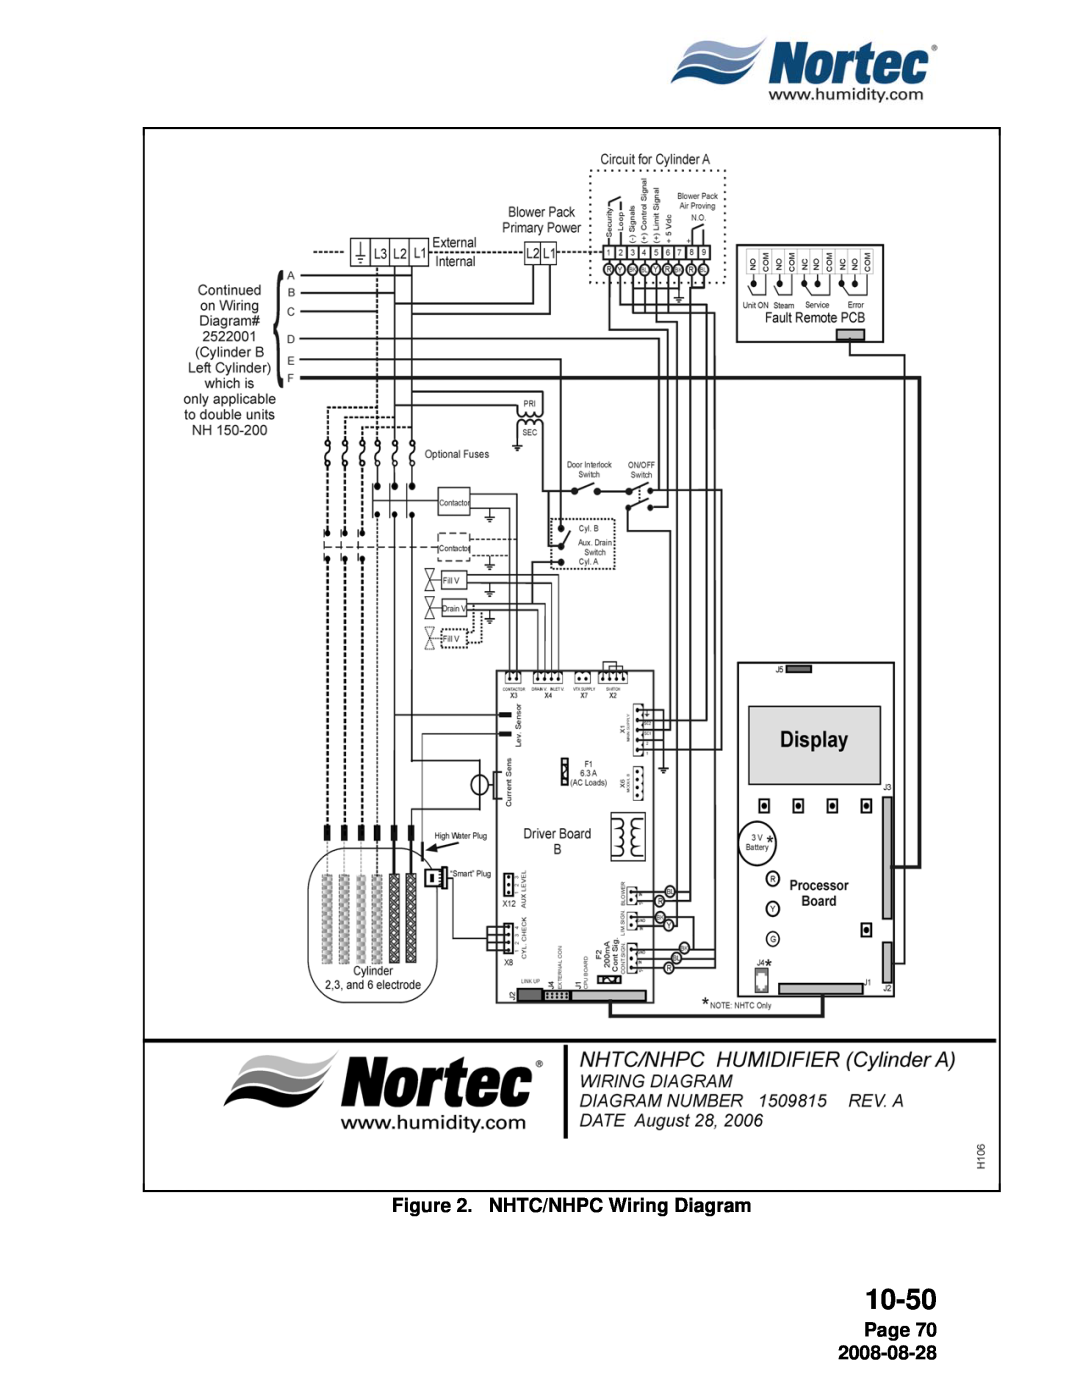 Nortec NH Series installation manual NHTC/NHPC Wiring Diagram, Page 70, 10-50 